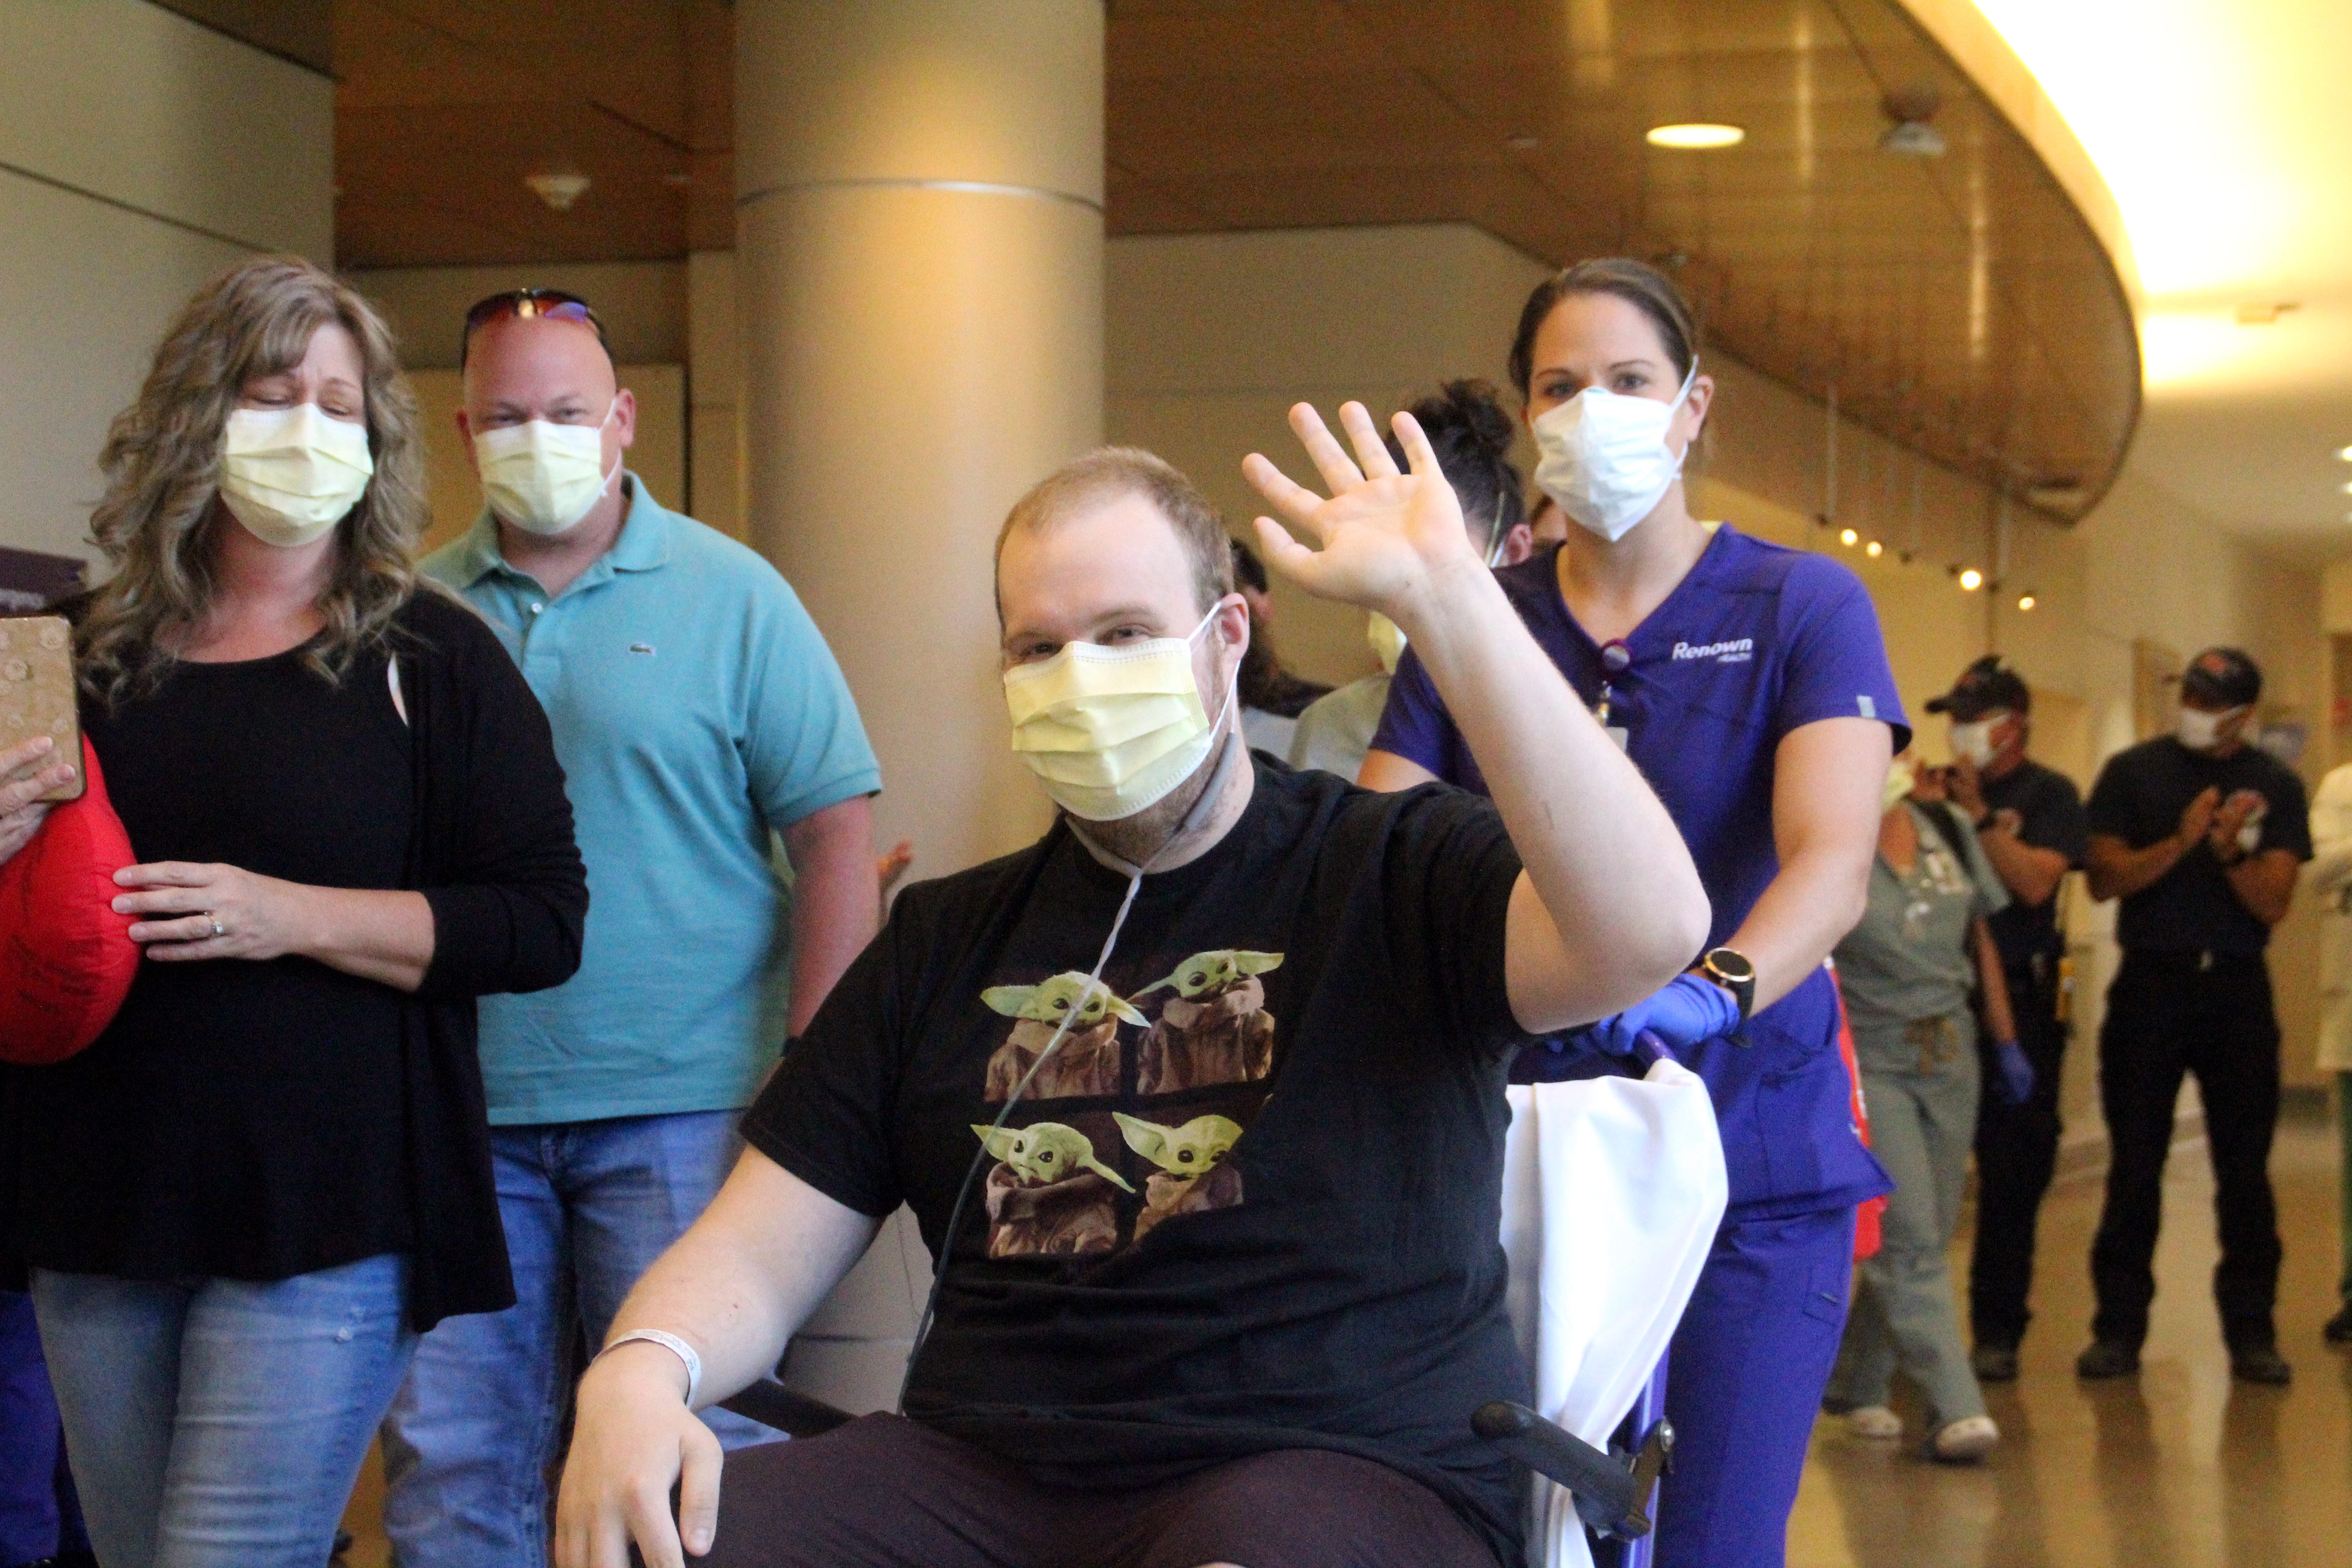 Austin Meegan waves as he is discharged from Renown Regional Medical Center on May 25, 2020 after being treated for COVID-19.